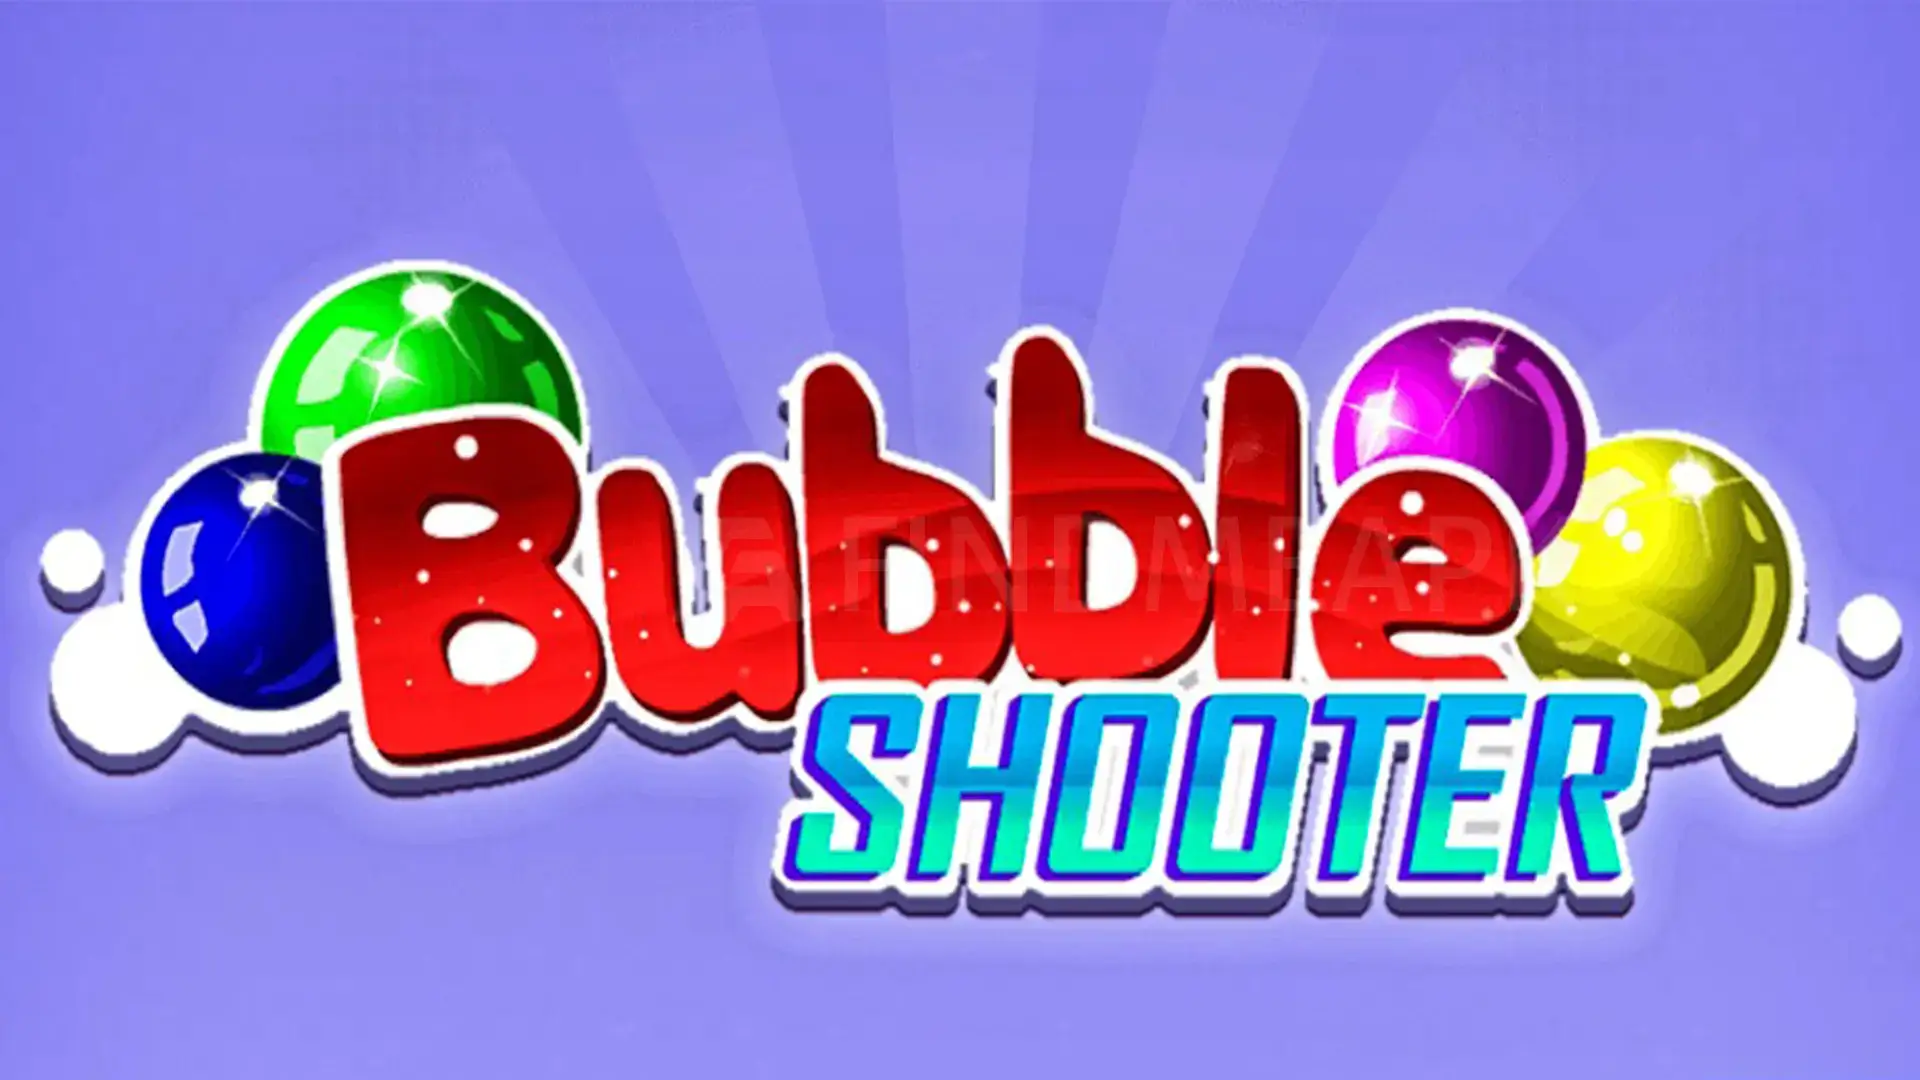 Bubble shooter feature image